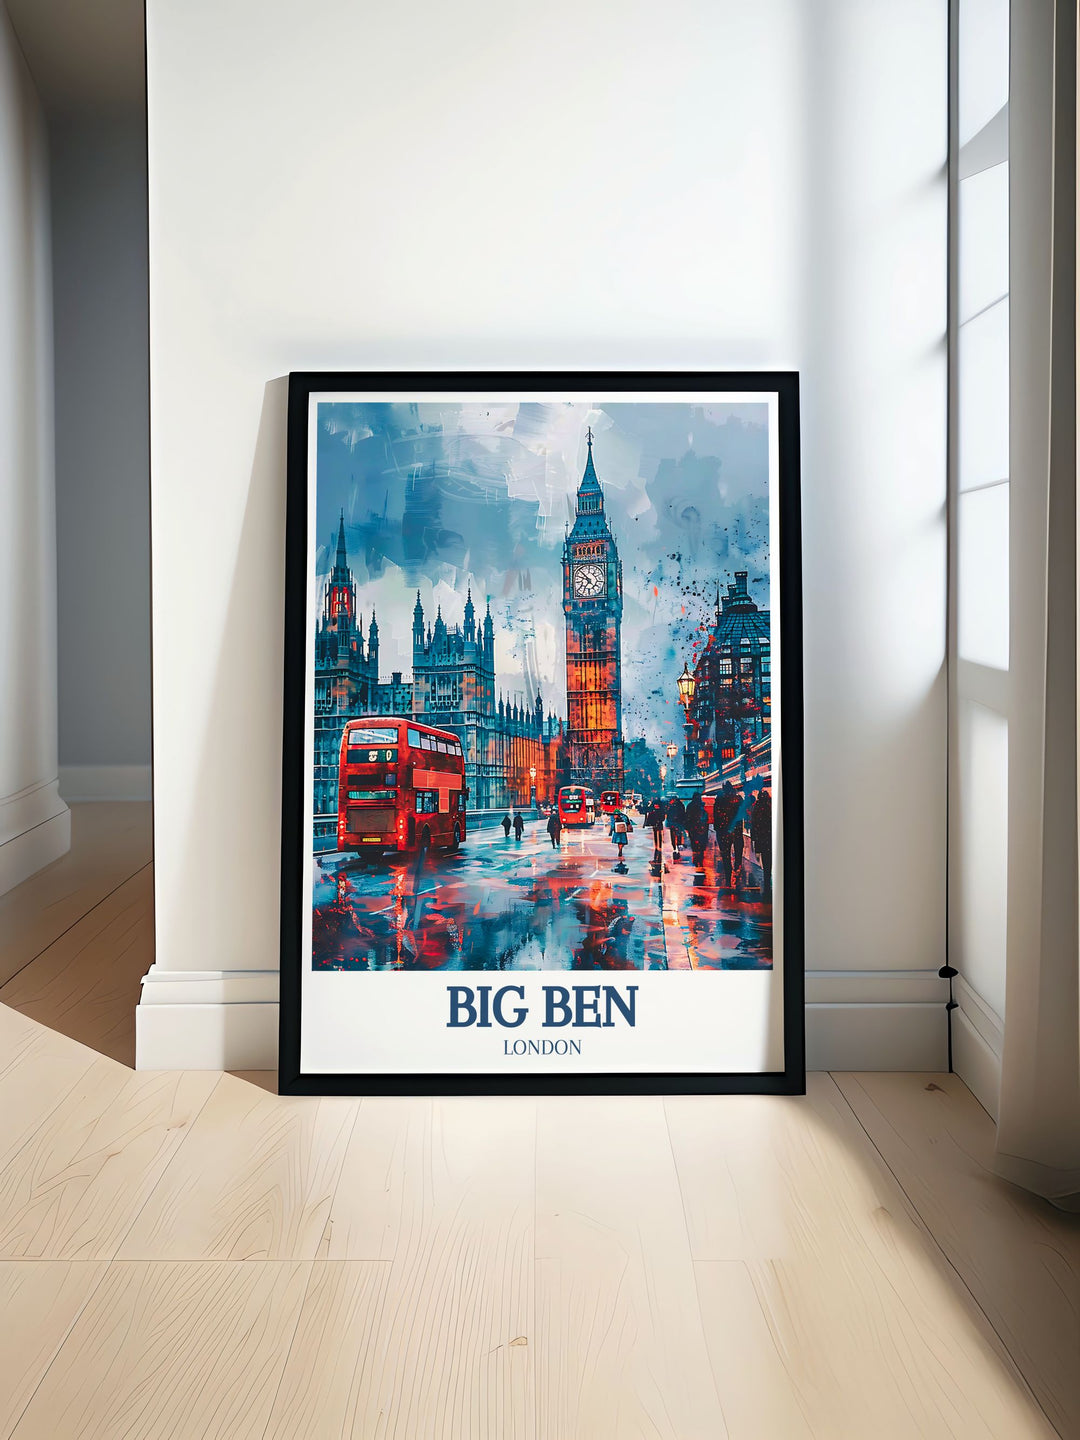 Unique artwork of London featuring Big Ben, Westminster Bridge, and the River Thames, perfect for personalized gifts or home decor. This print captures the essence of Londons most famous landmarks.